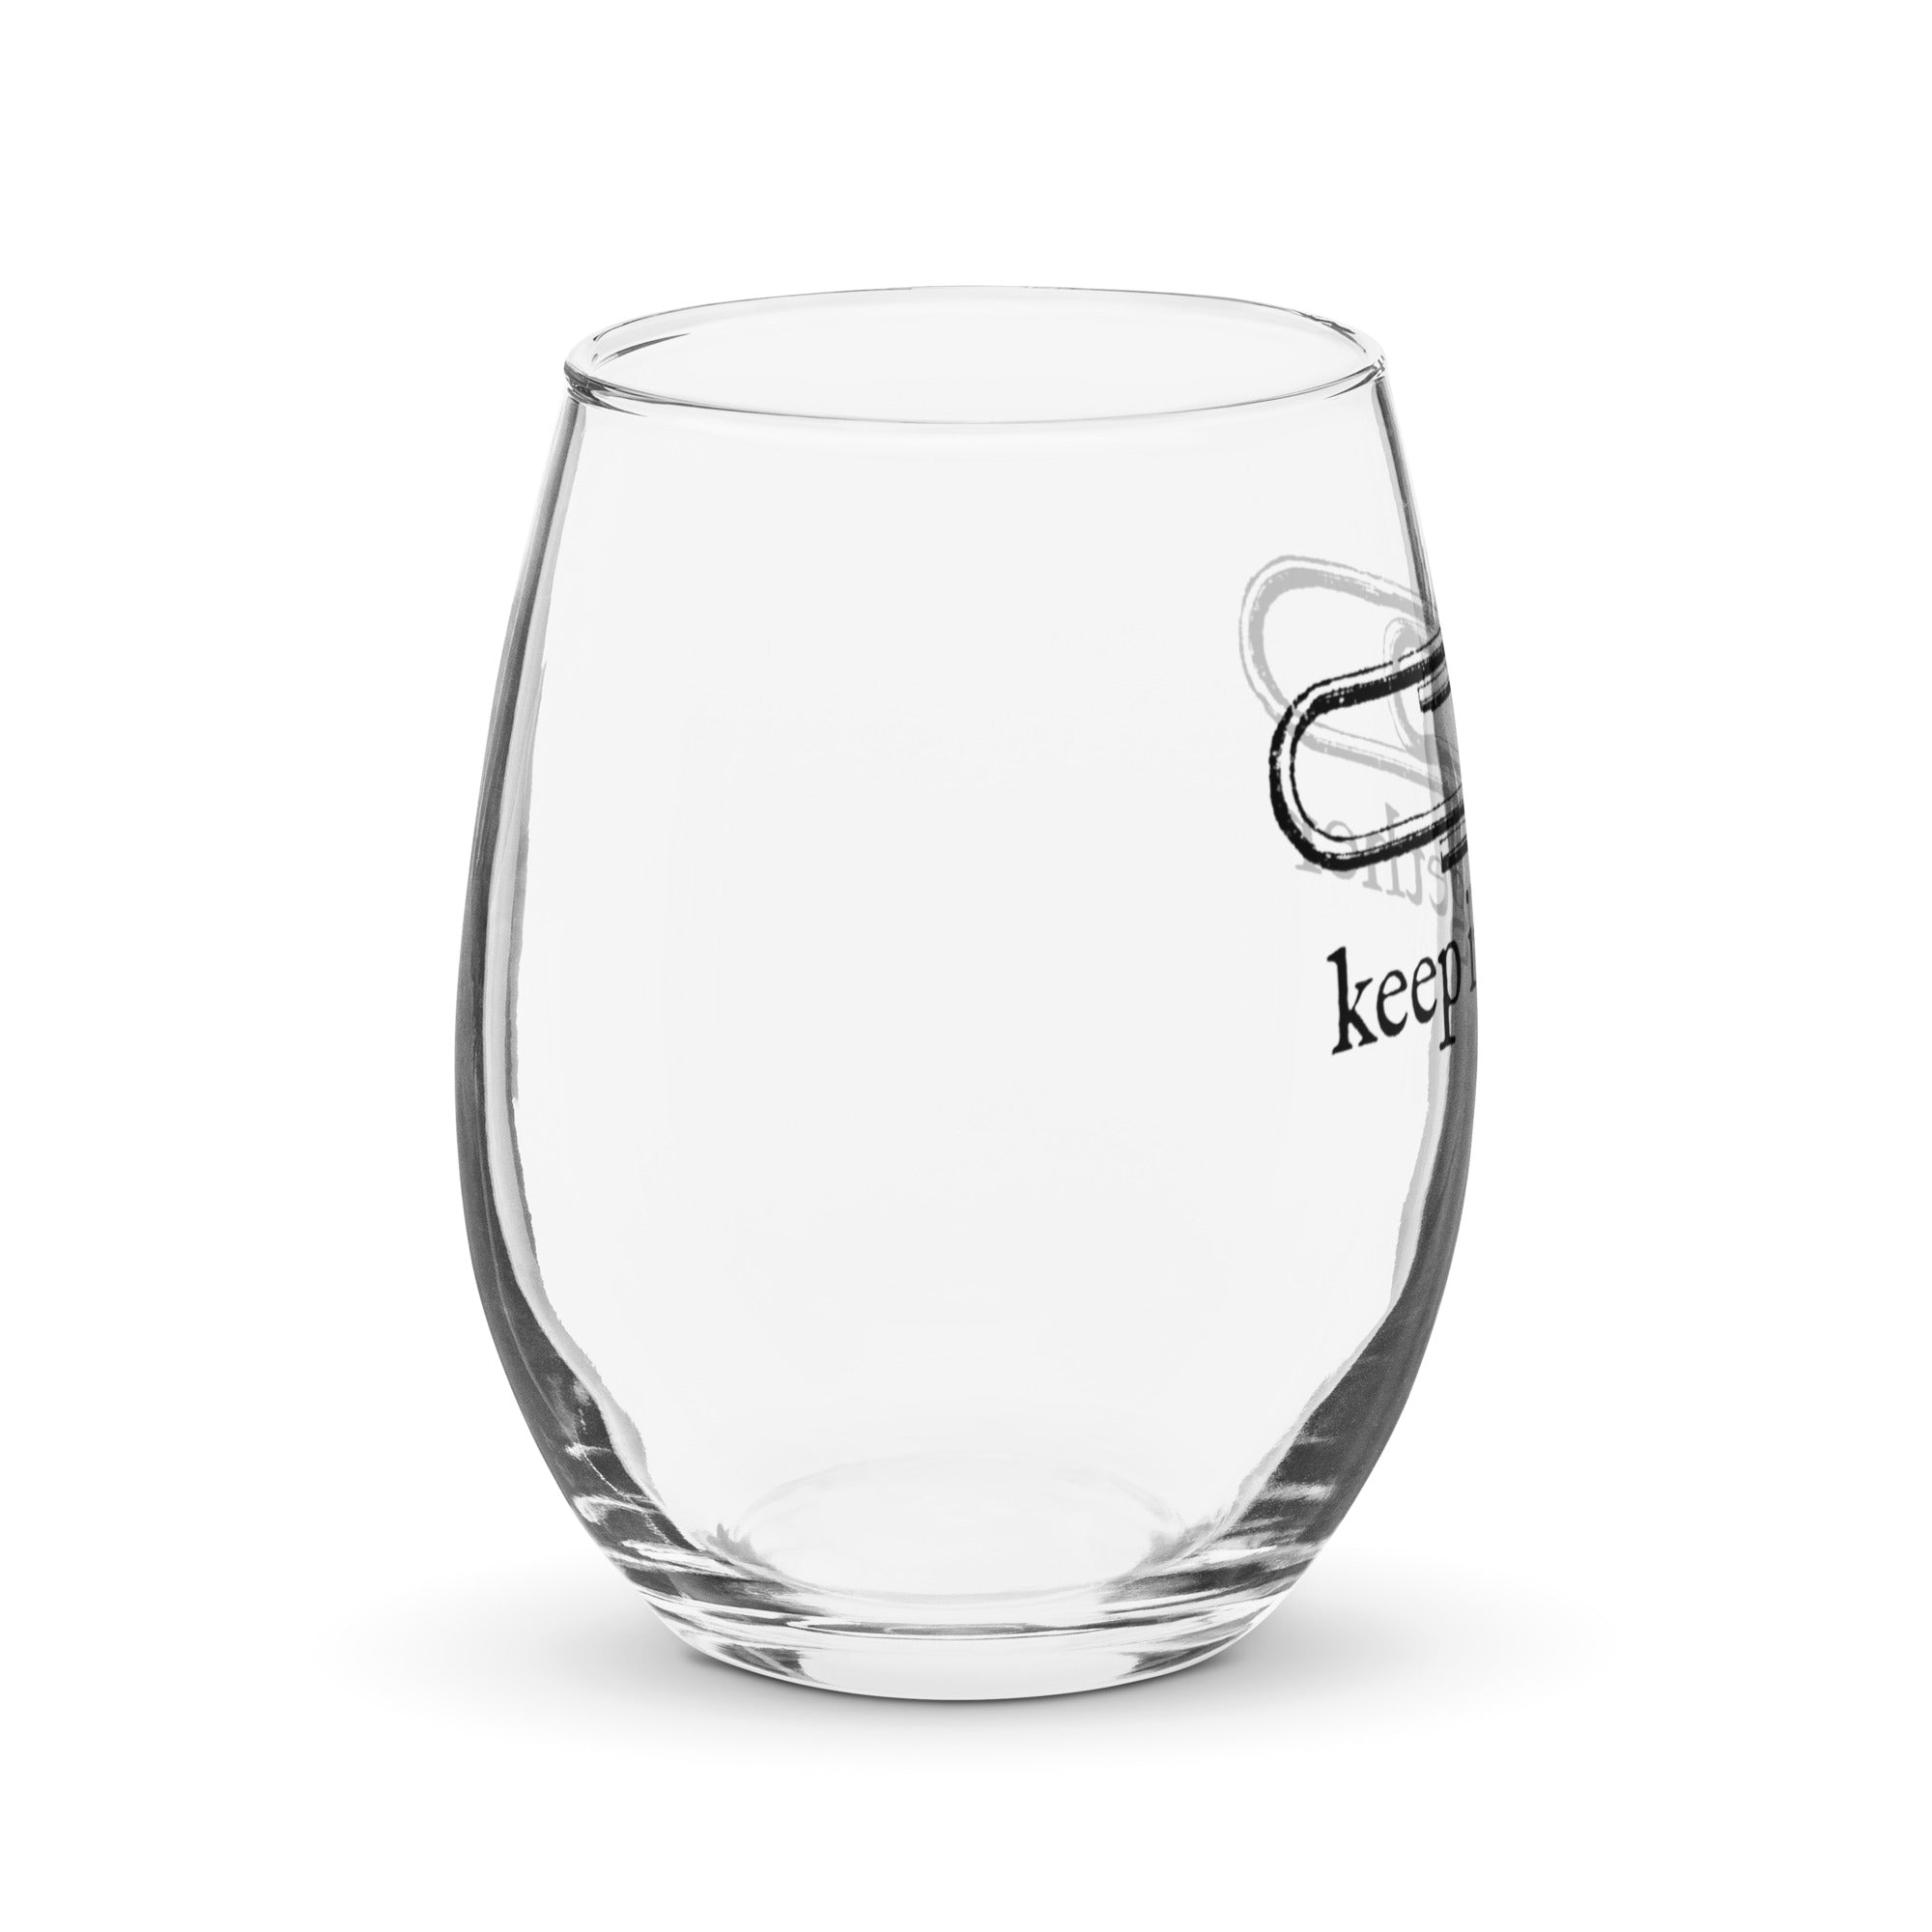 Keep It Together Stemless Wine Glass